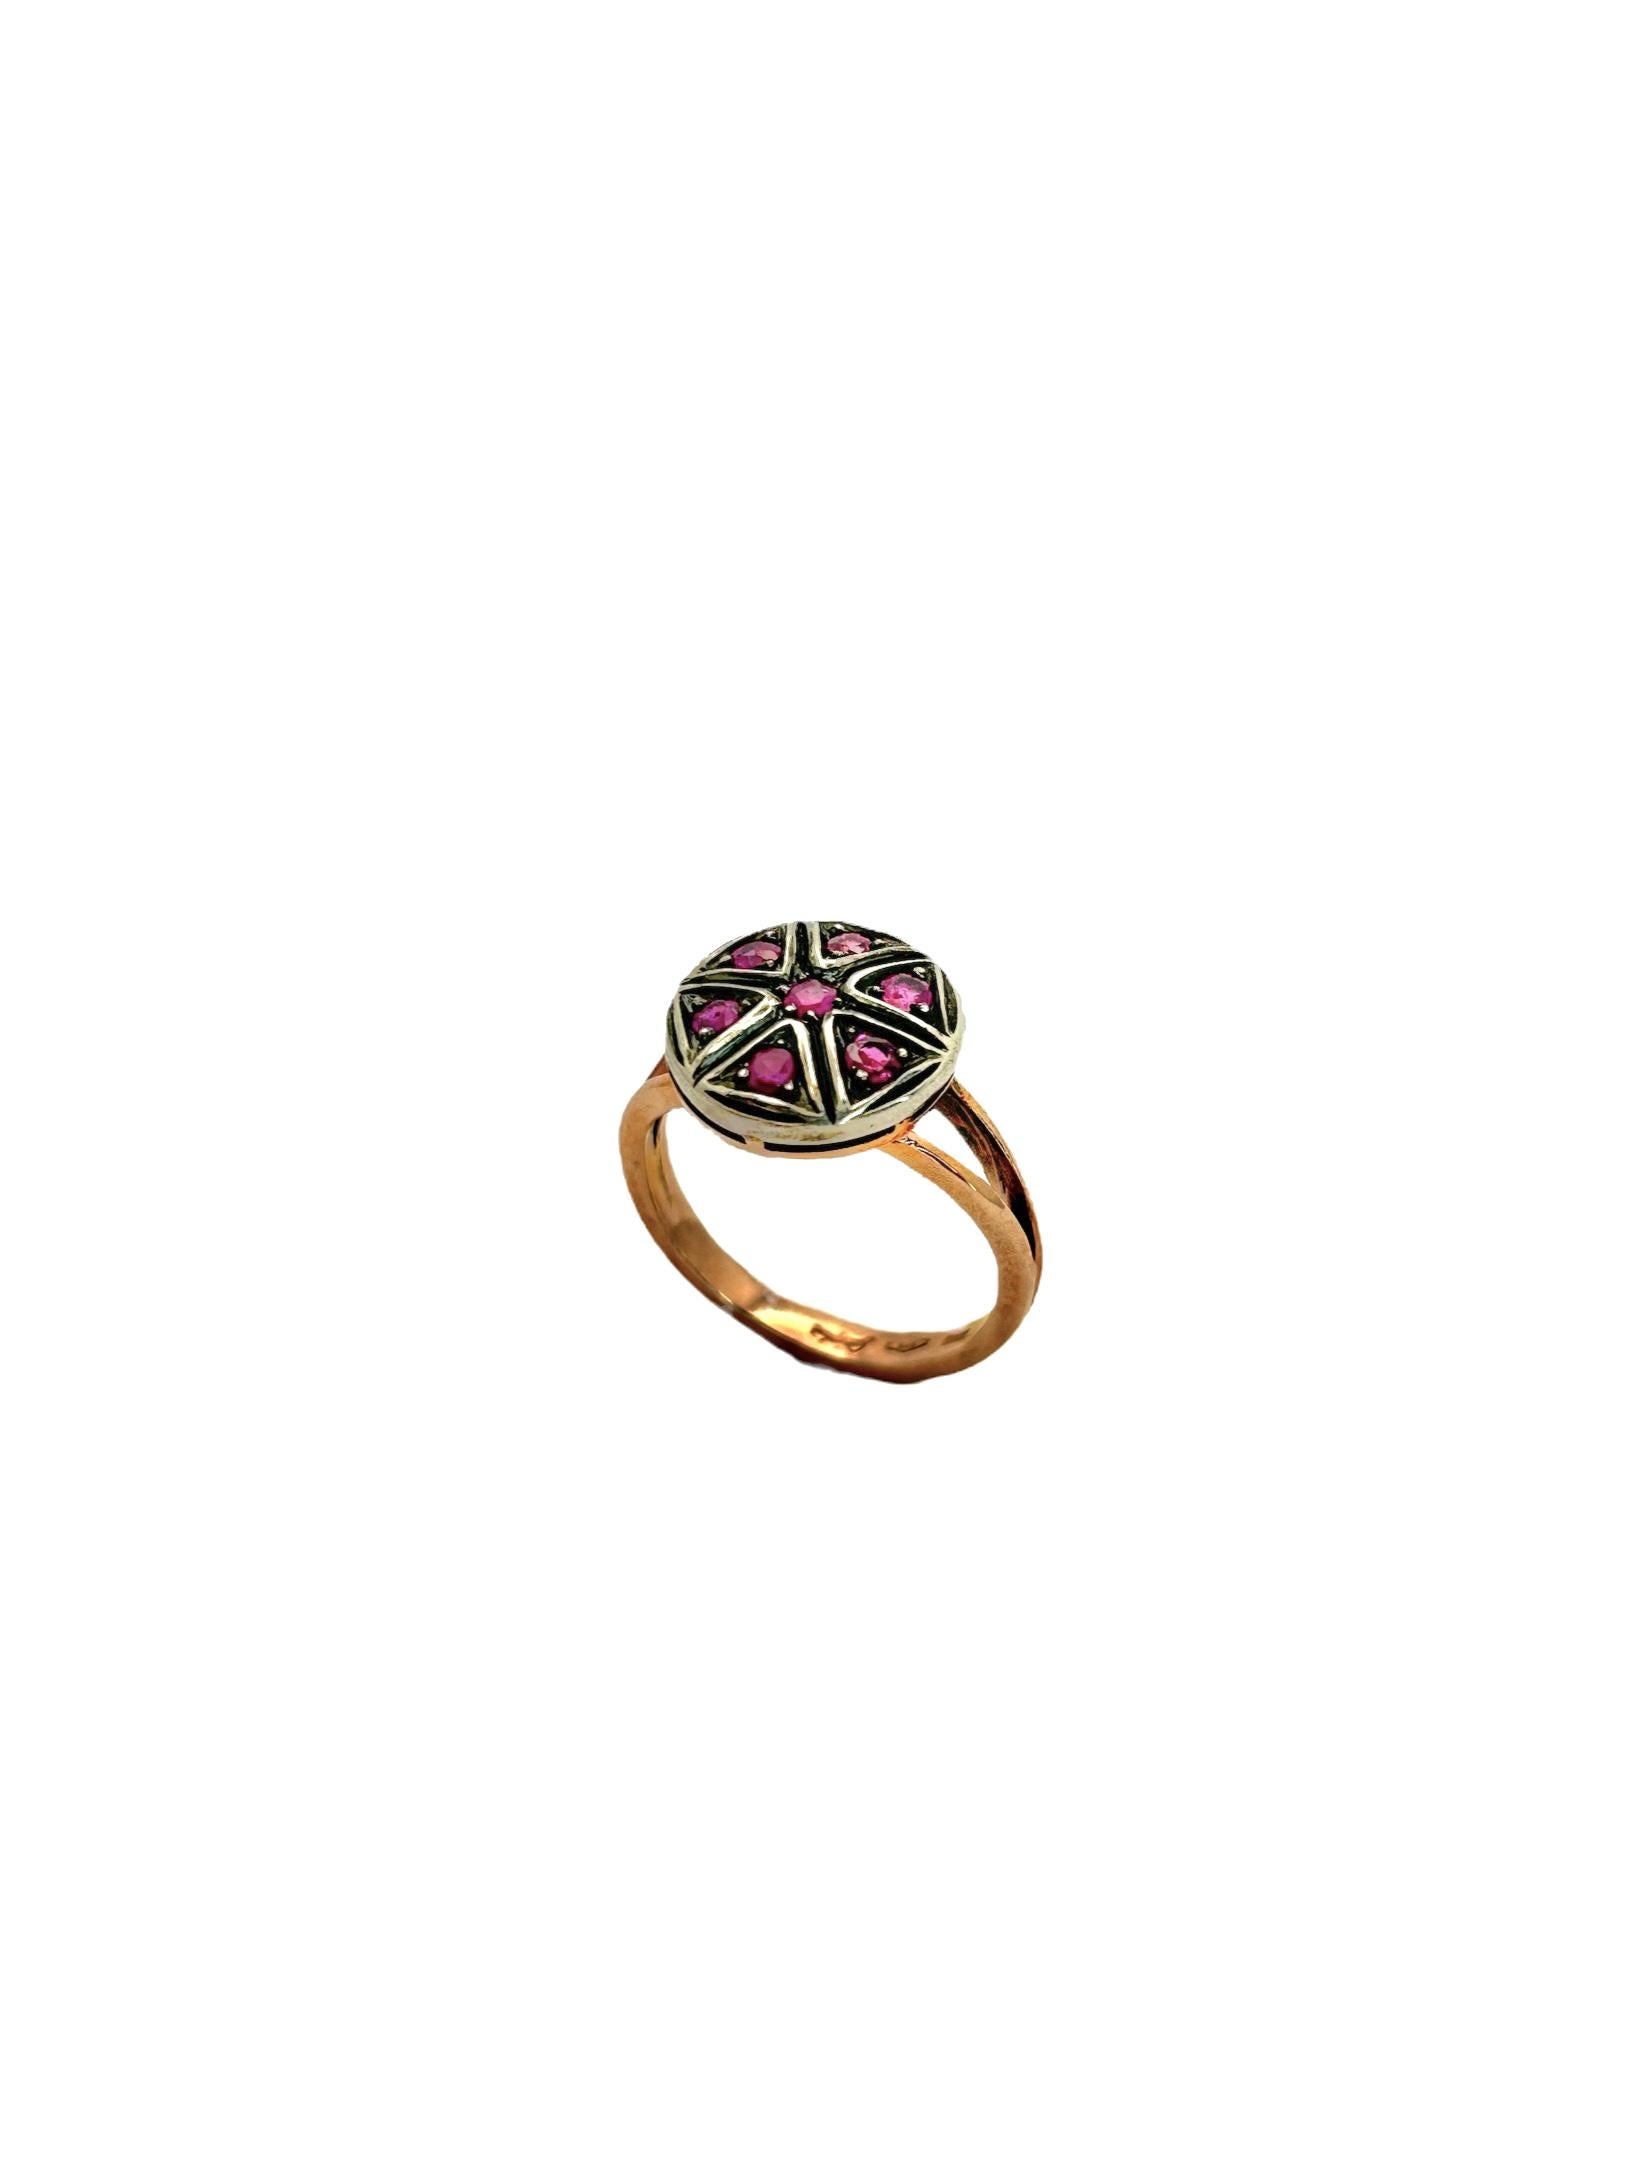 Brilliant Cut Victorian Era Pink Gold and Sterling Silver Rubies Ring For Sale